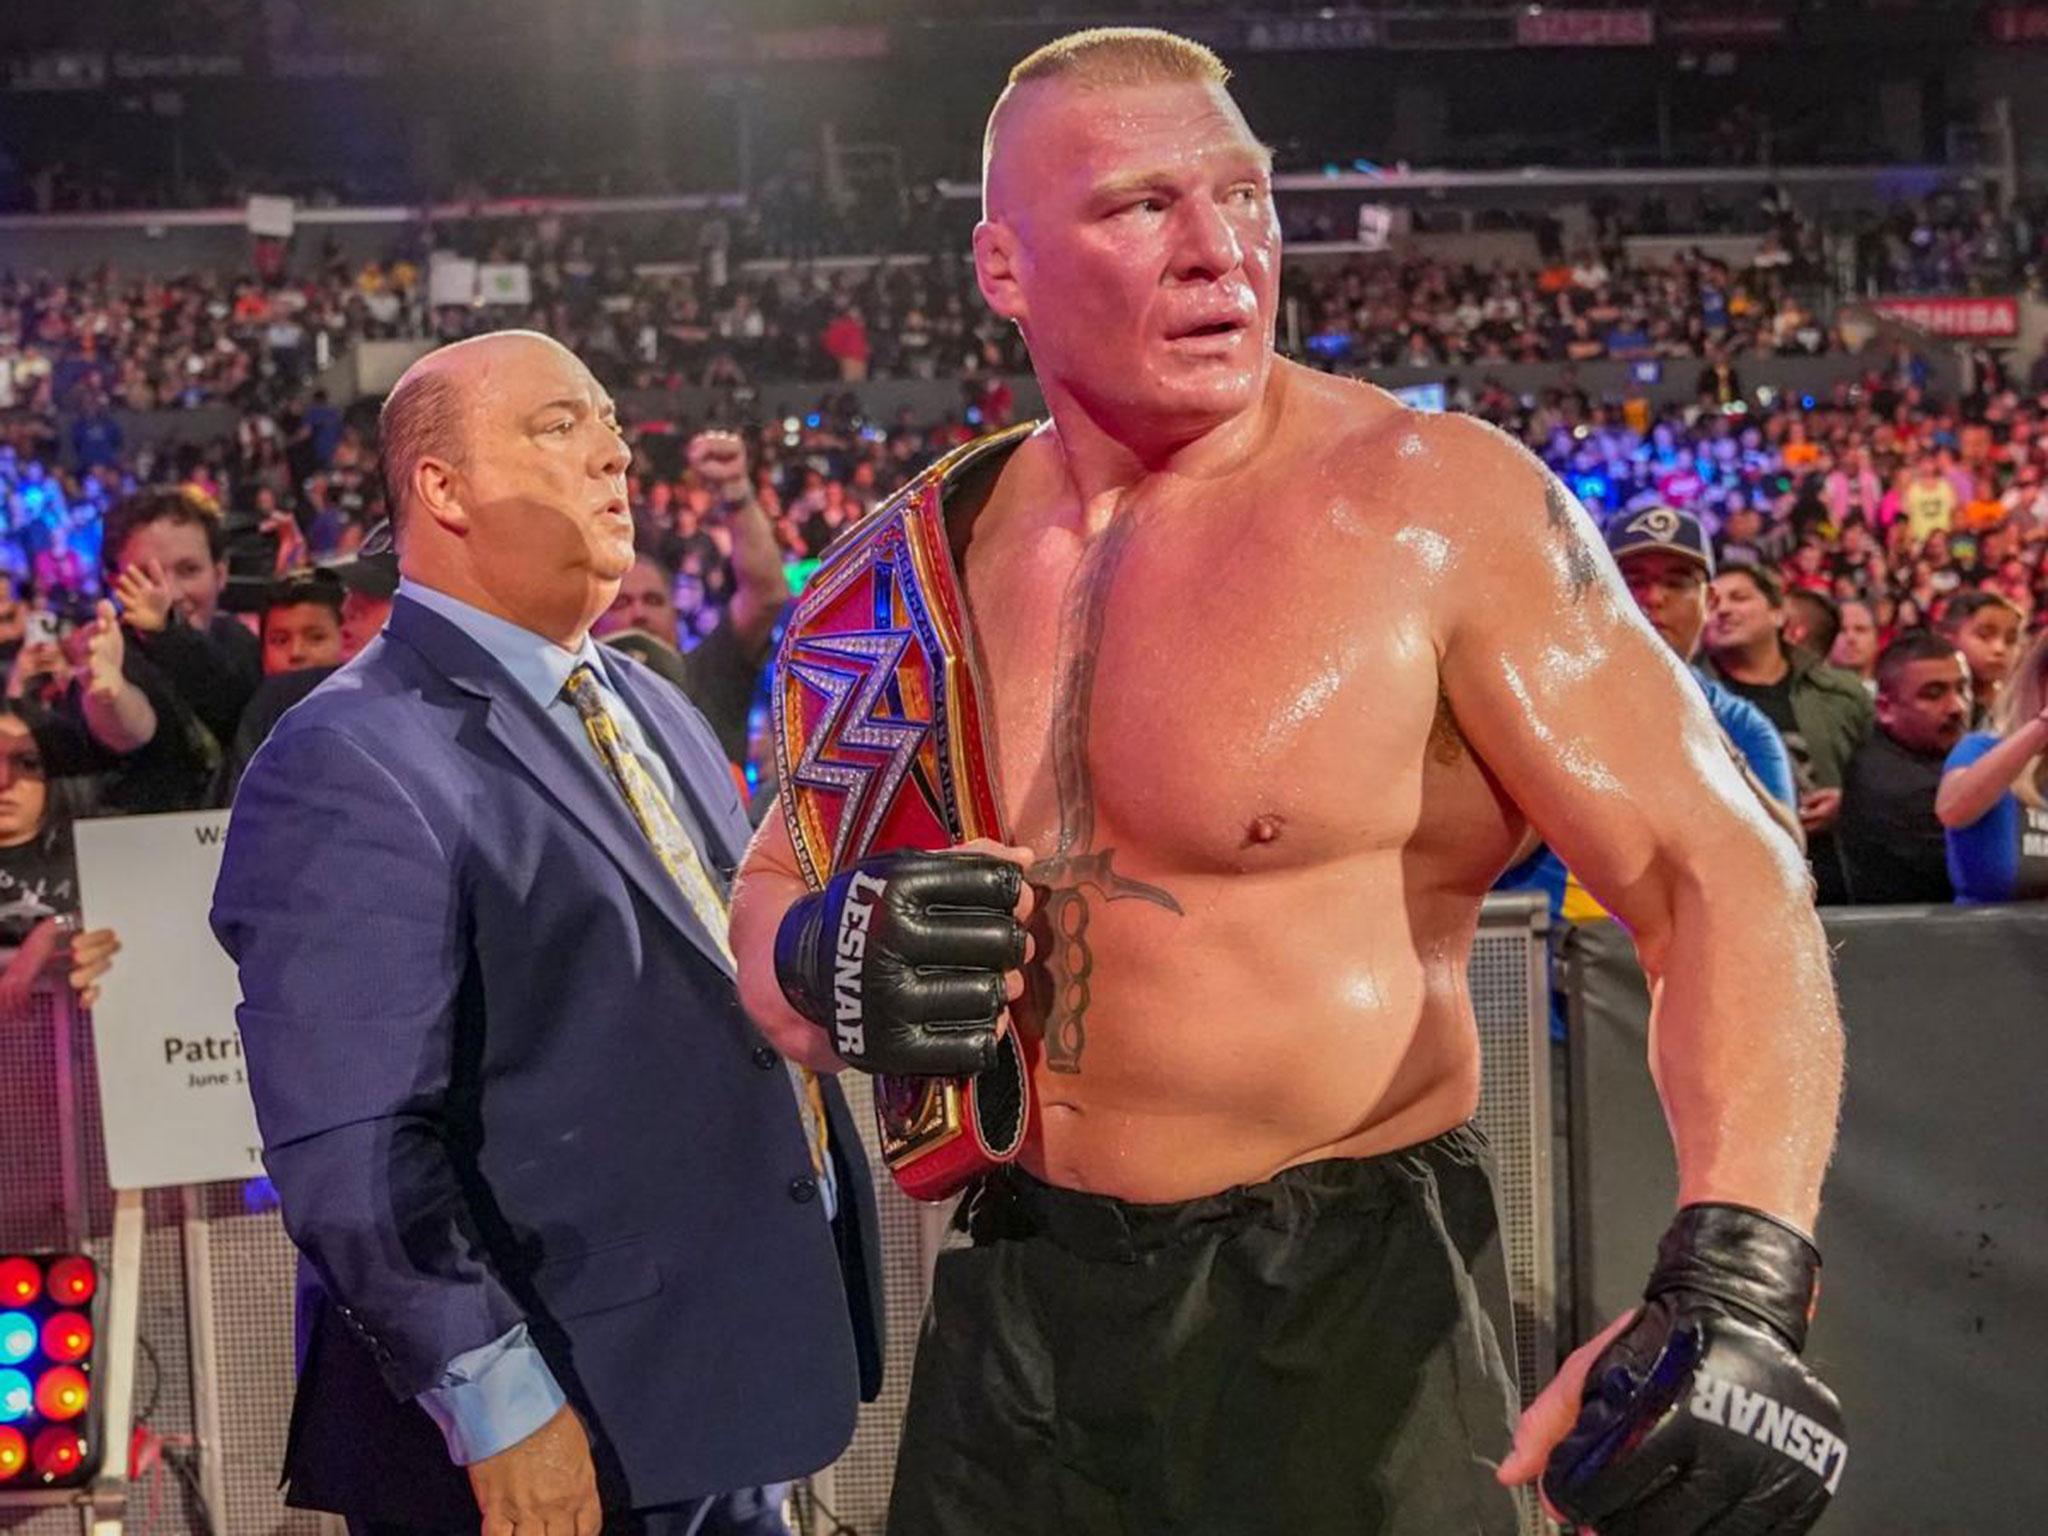 Brock Lesnar Porn - Paige sex tape leak caused WWE star to develop anorexia